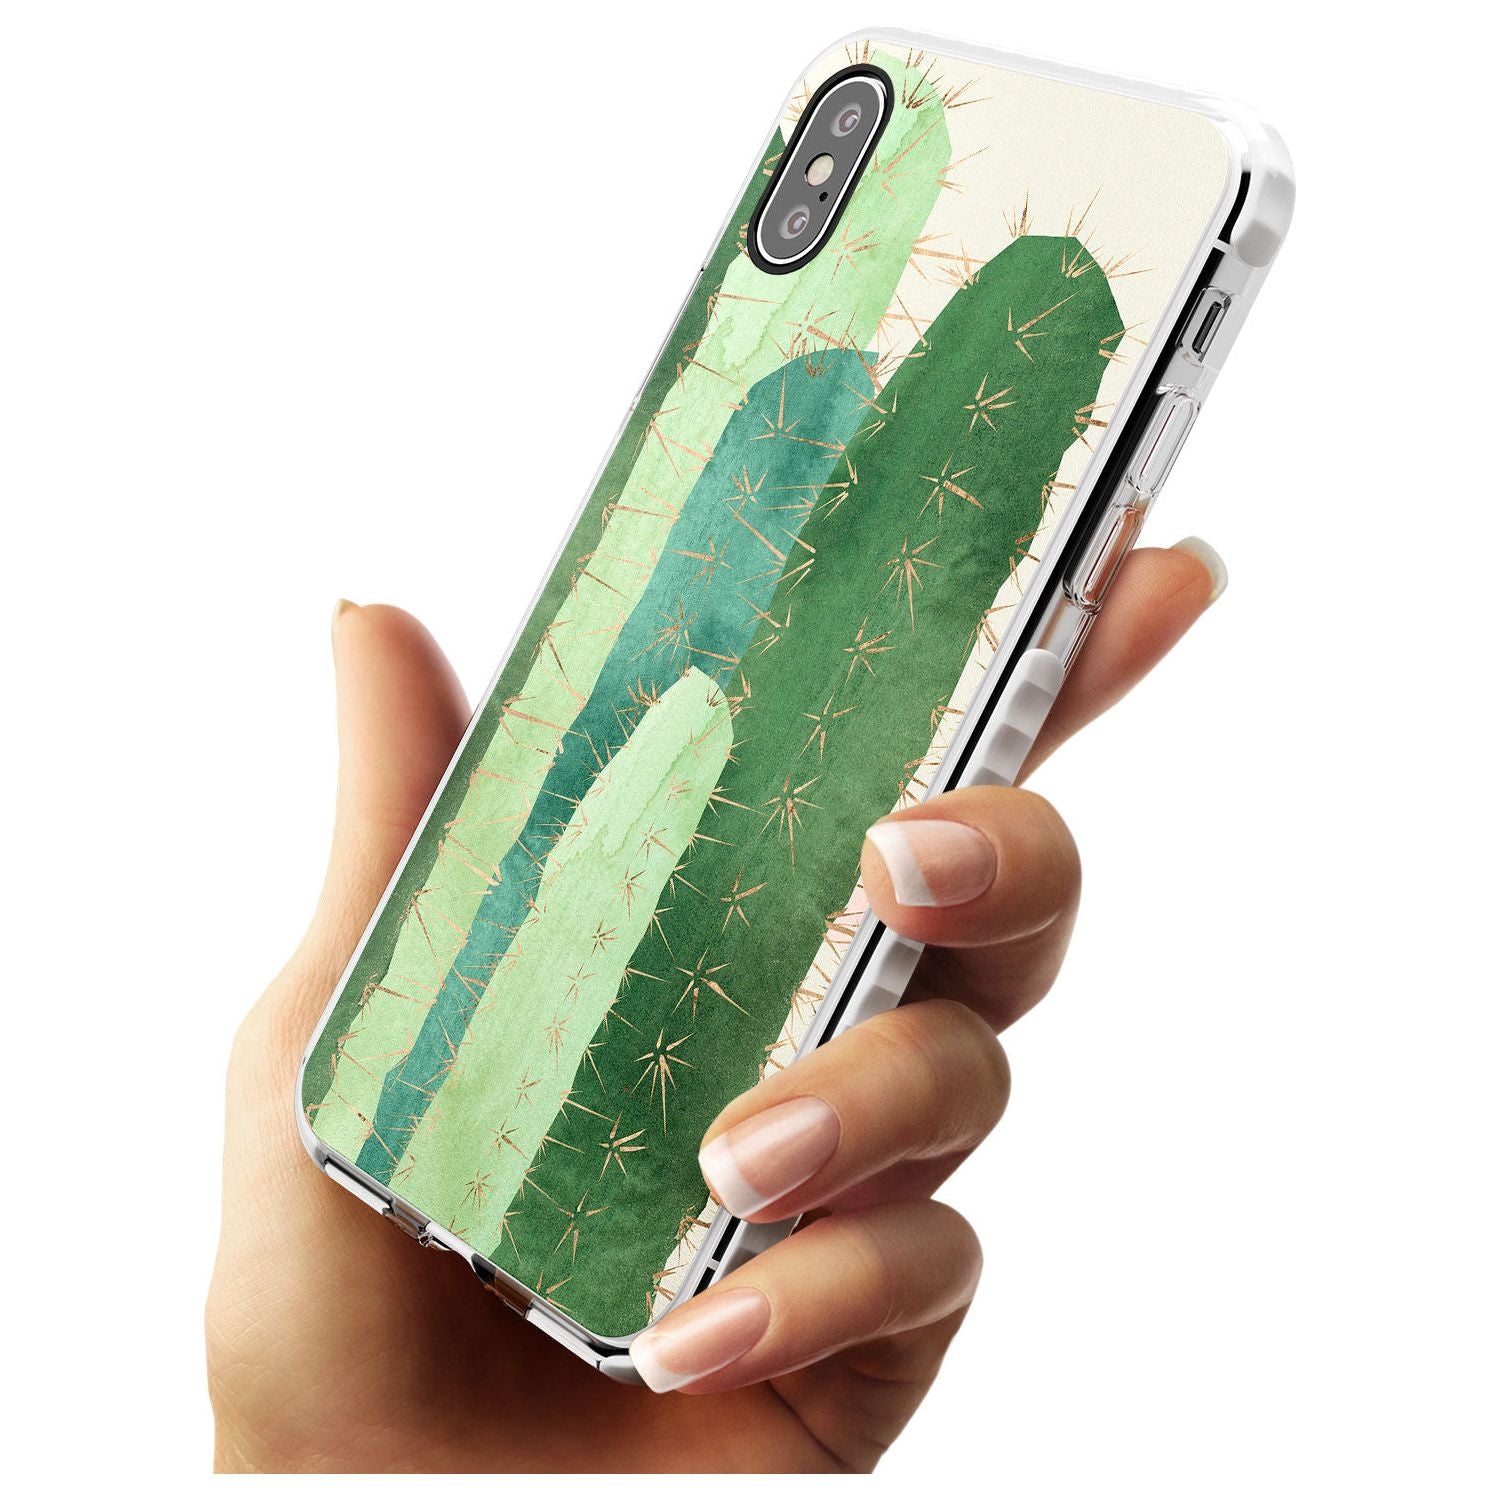 Large Cacti Mix Design Impact Phone Case for iPhone X XS Max XR